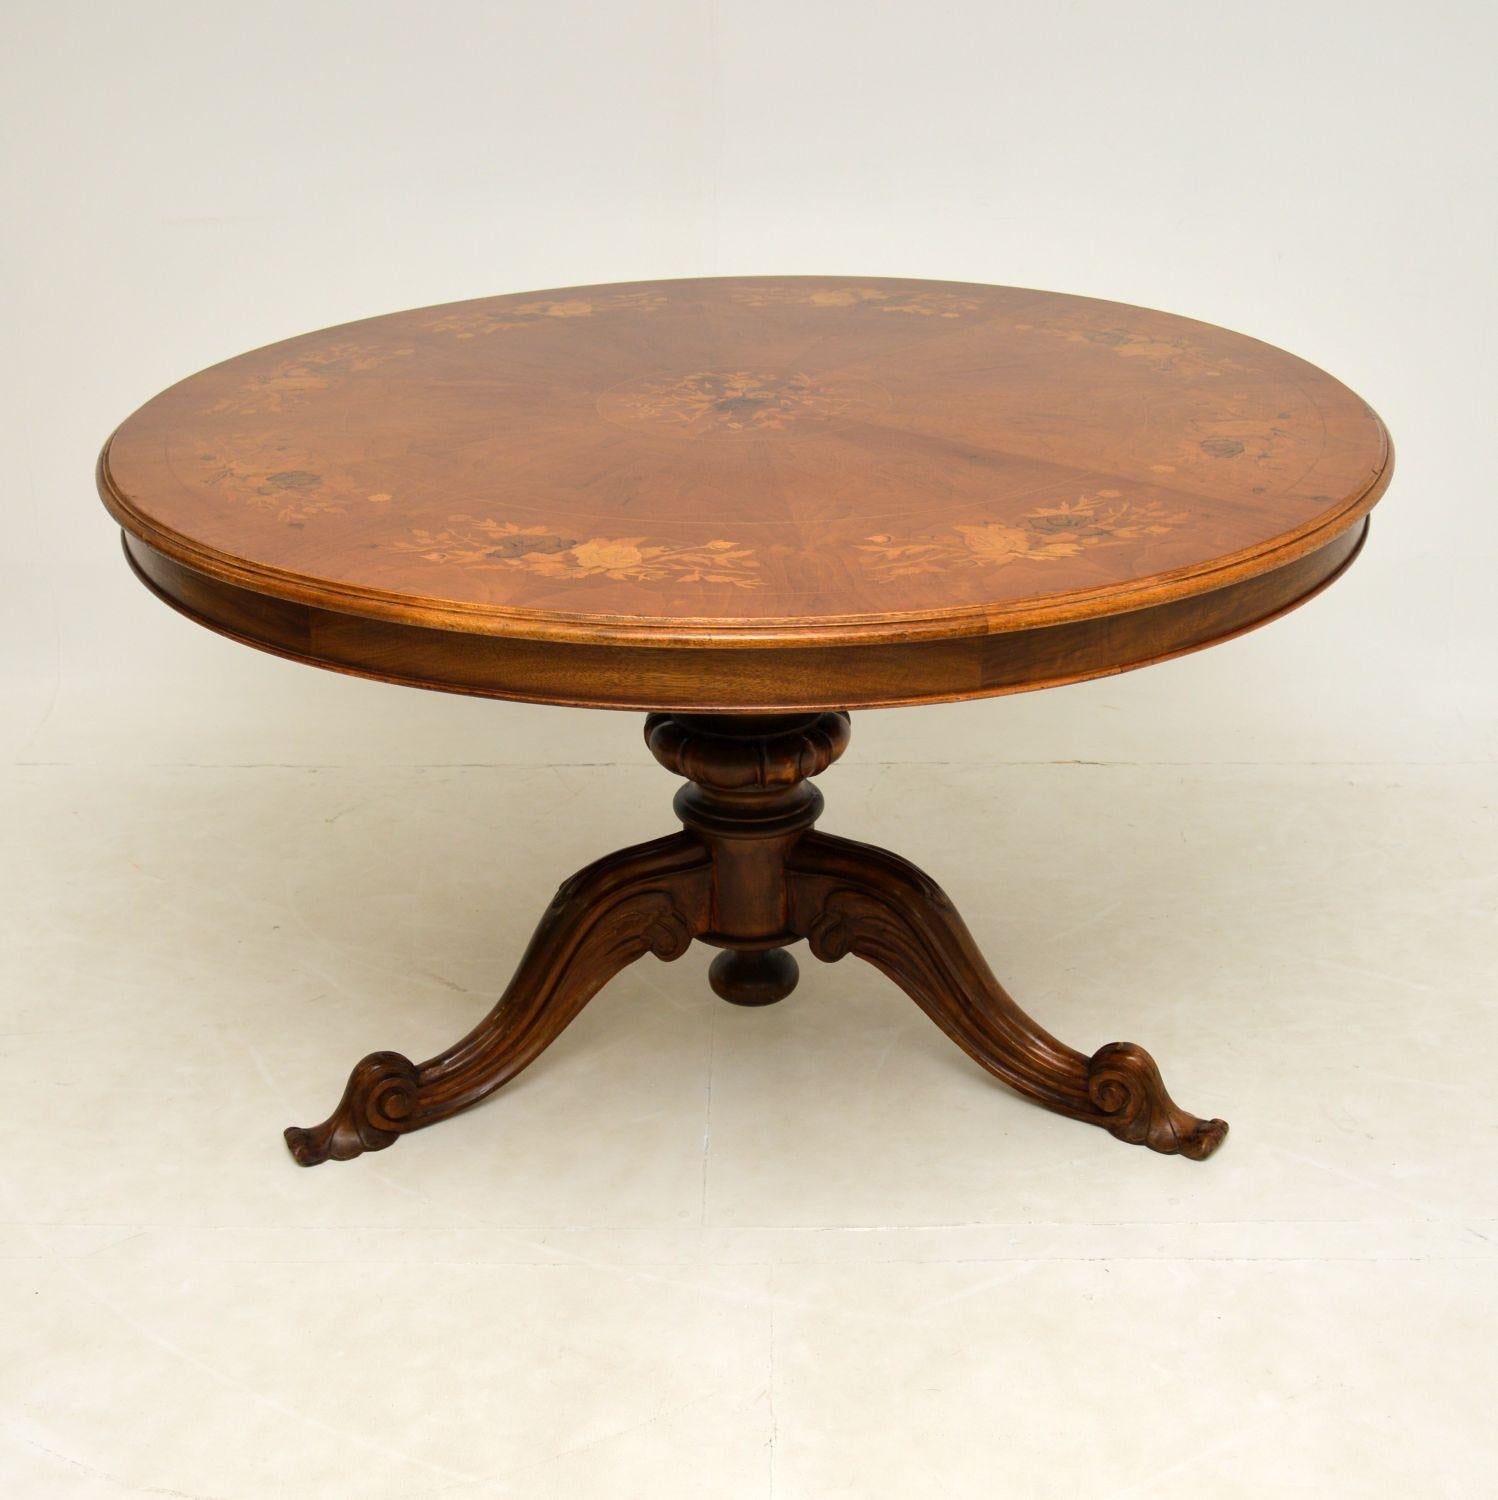 A superb antique circular dining table, beautifully made in walnut with profuse floral marquetry on a segmented top. This was made in Italy & I would date it from around the 1930’s period.

The quality is absolutely fantastic and this is a great